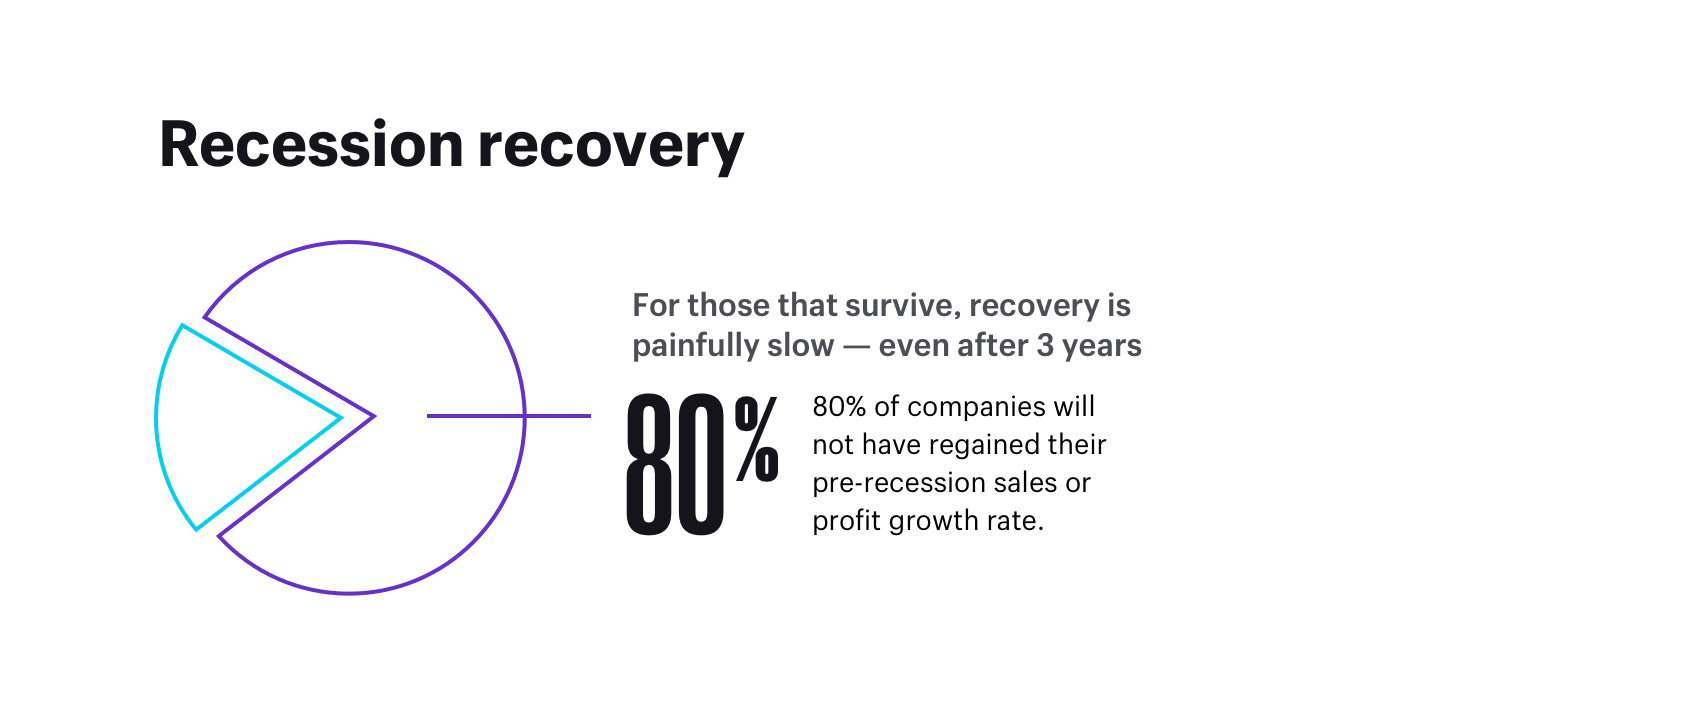 Three years after a downturn, 80% had still not regained their pre-recession sales and profit growth rates. Only a sliver flourished after a recession.